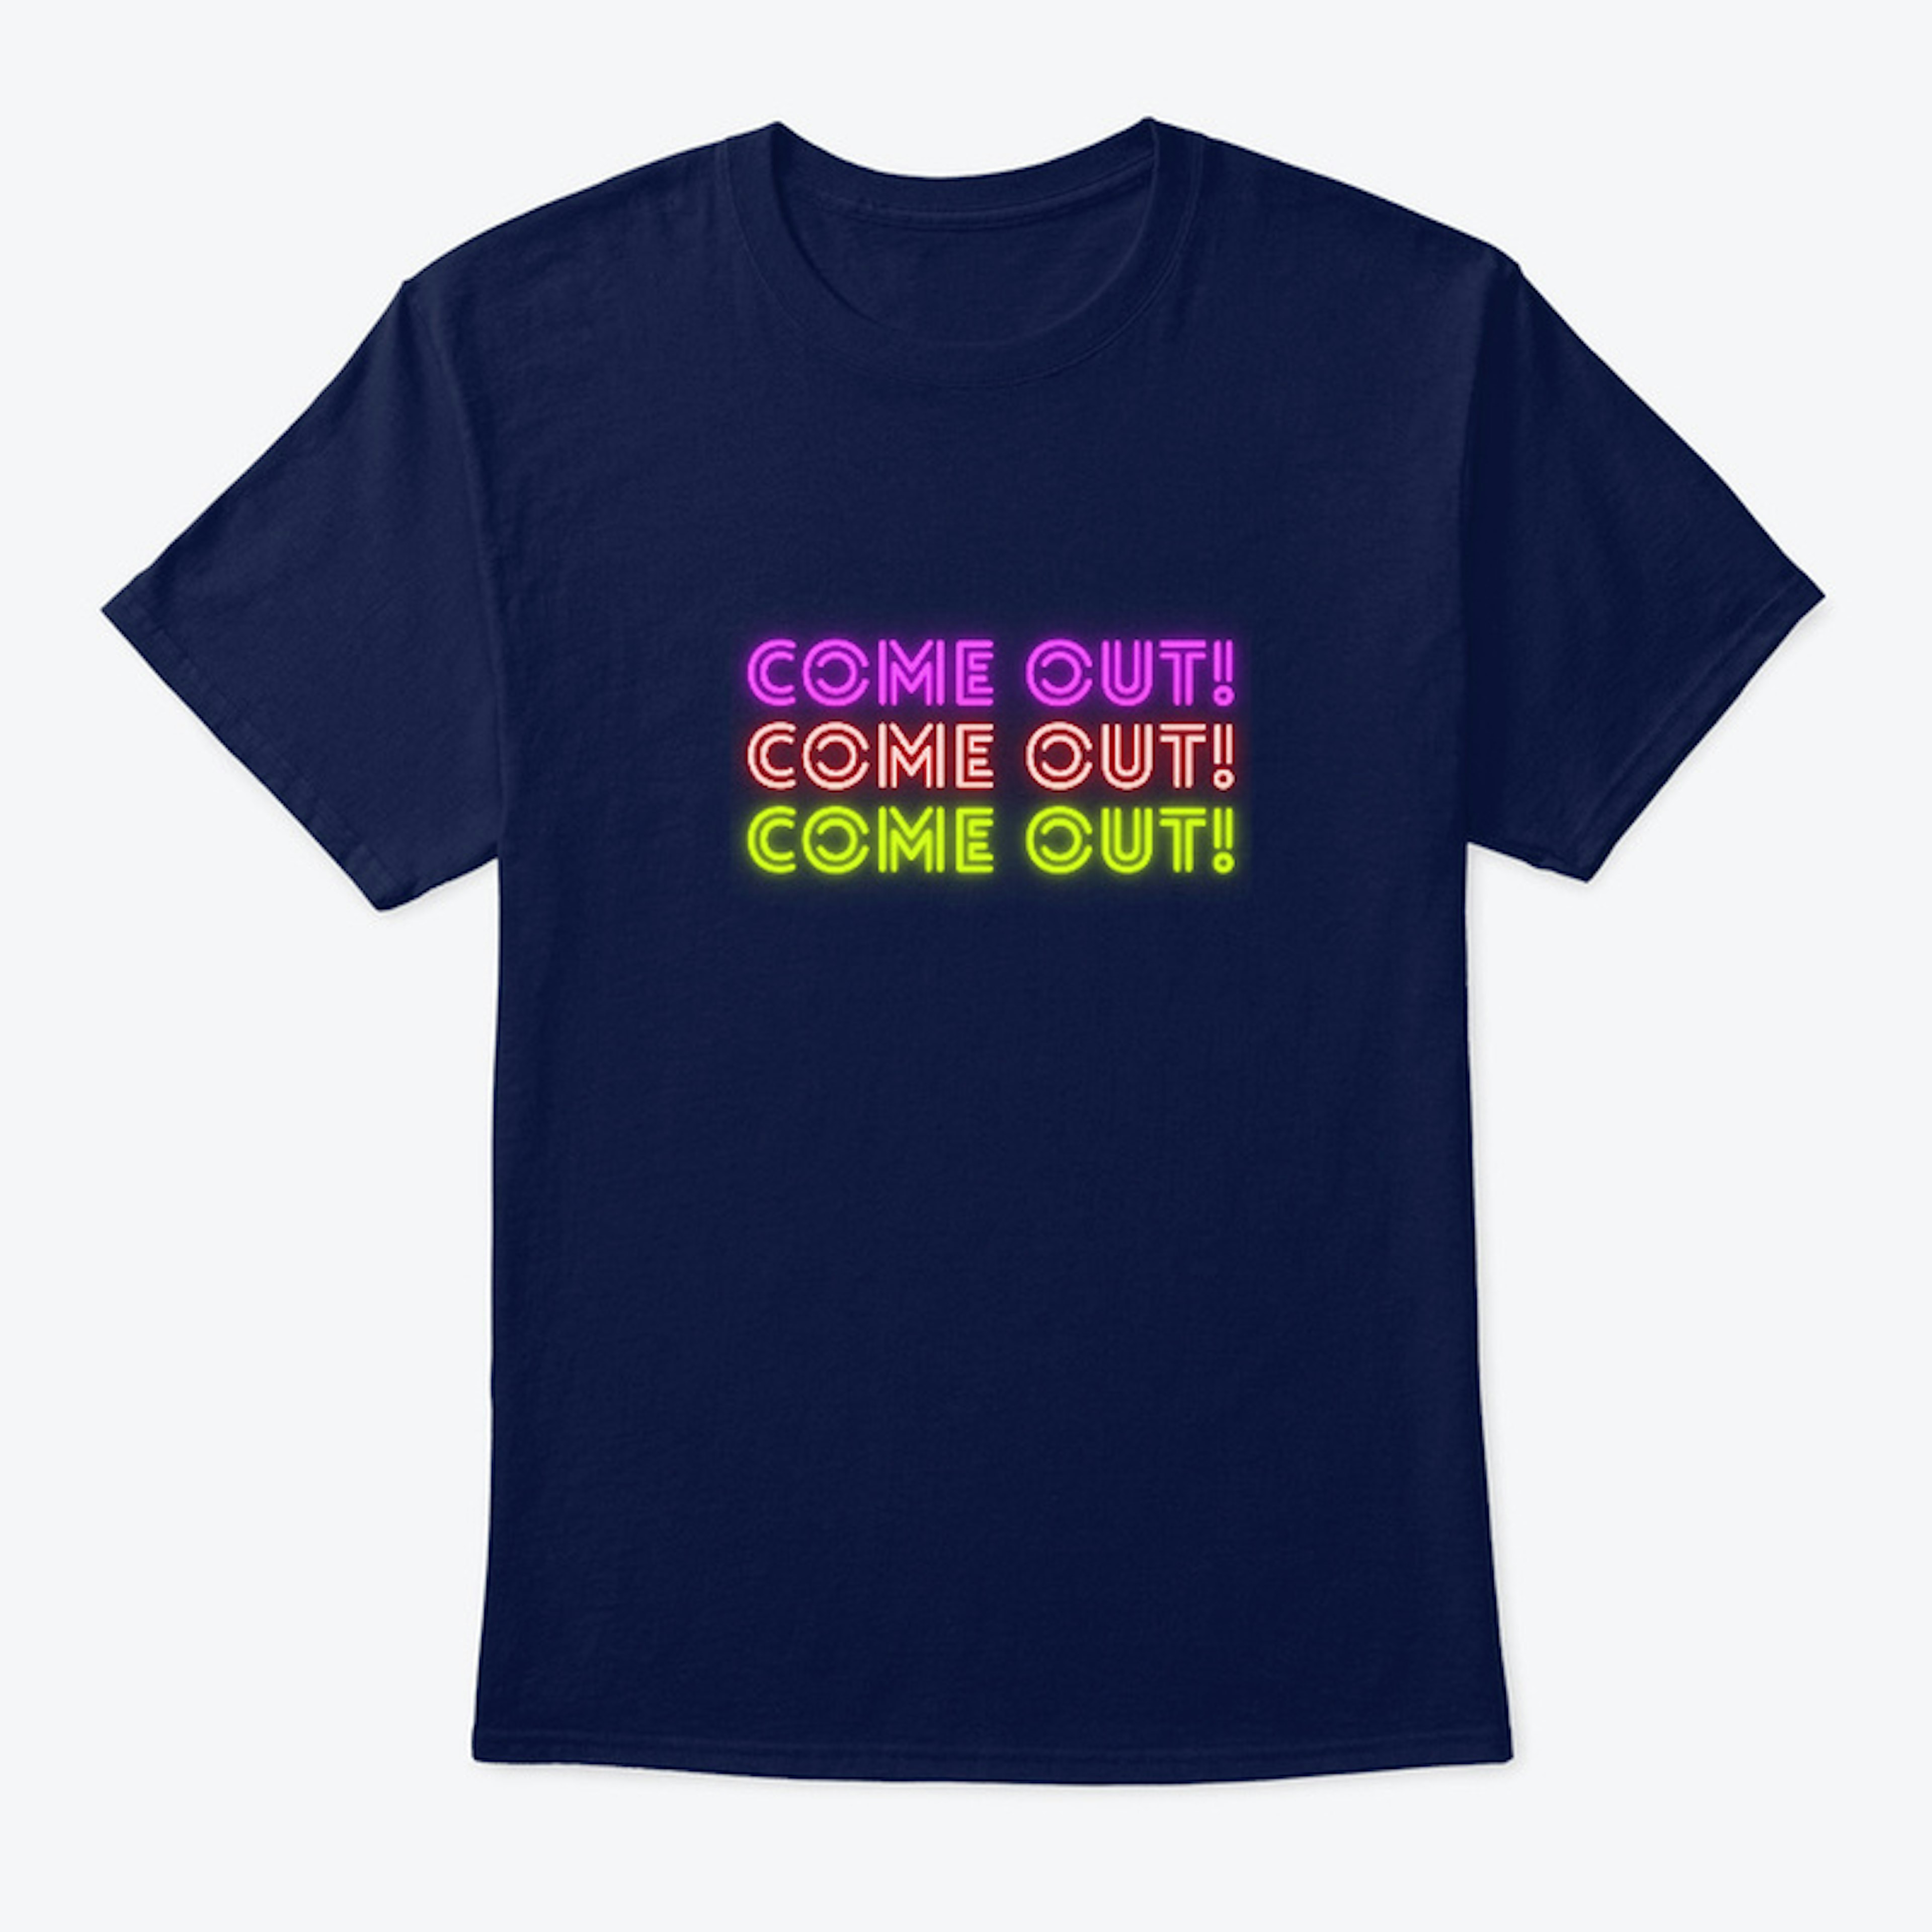 COME OUT shirt